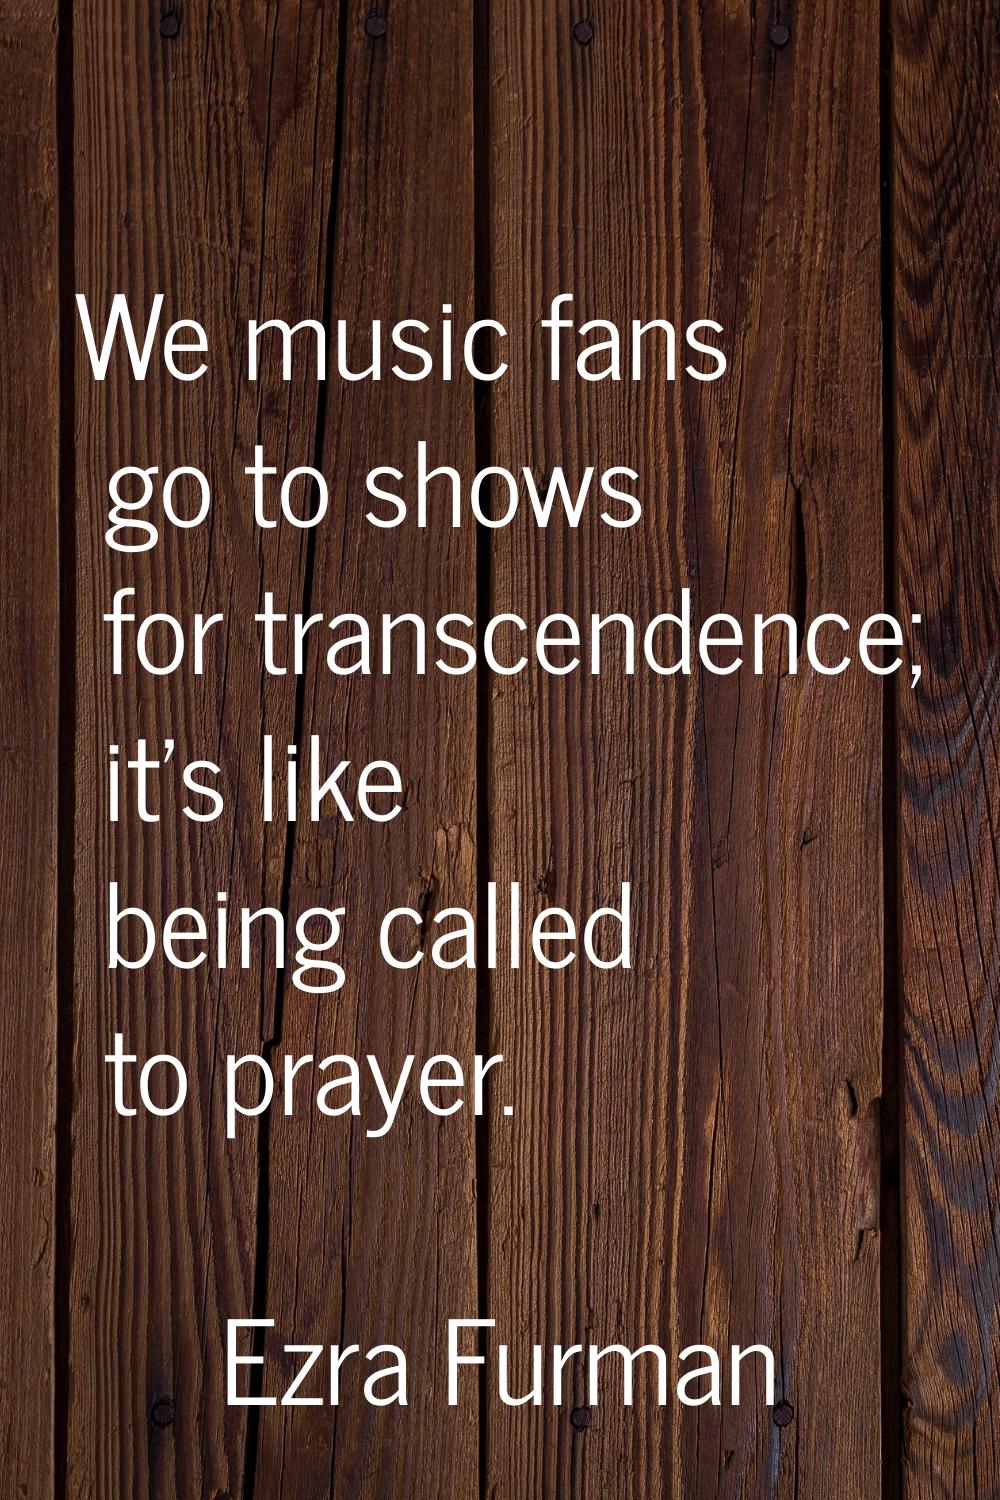 We music fans go to shows for transcendence; it's like being called to prayer.